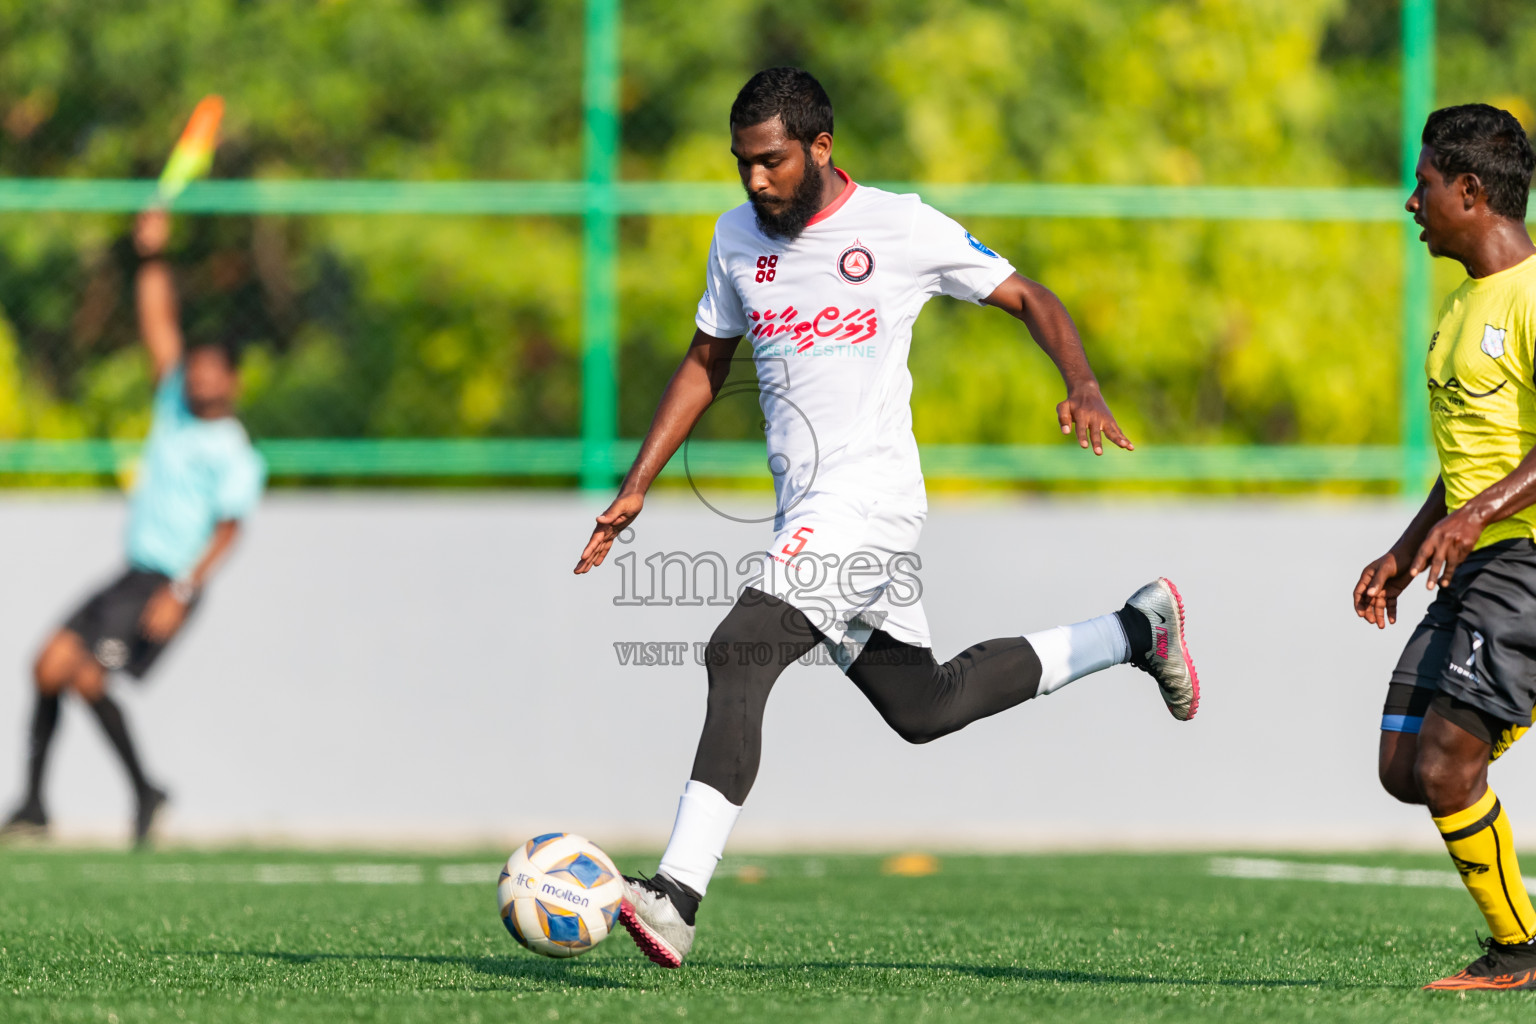 Kanmathi Juniors vs Furious SC from Manadhoo Council Cup 2024 in N Manadhoo Maldives on Monday, 19th February 2023. Photos: Nausham Waheed / images.mv